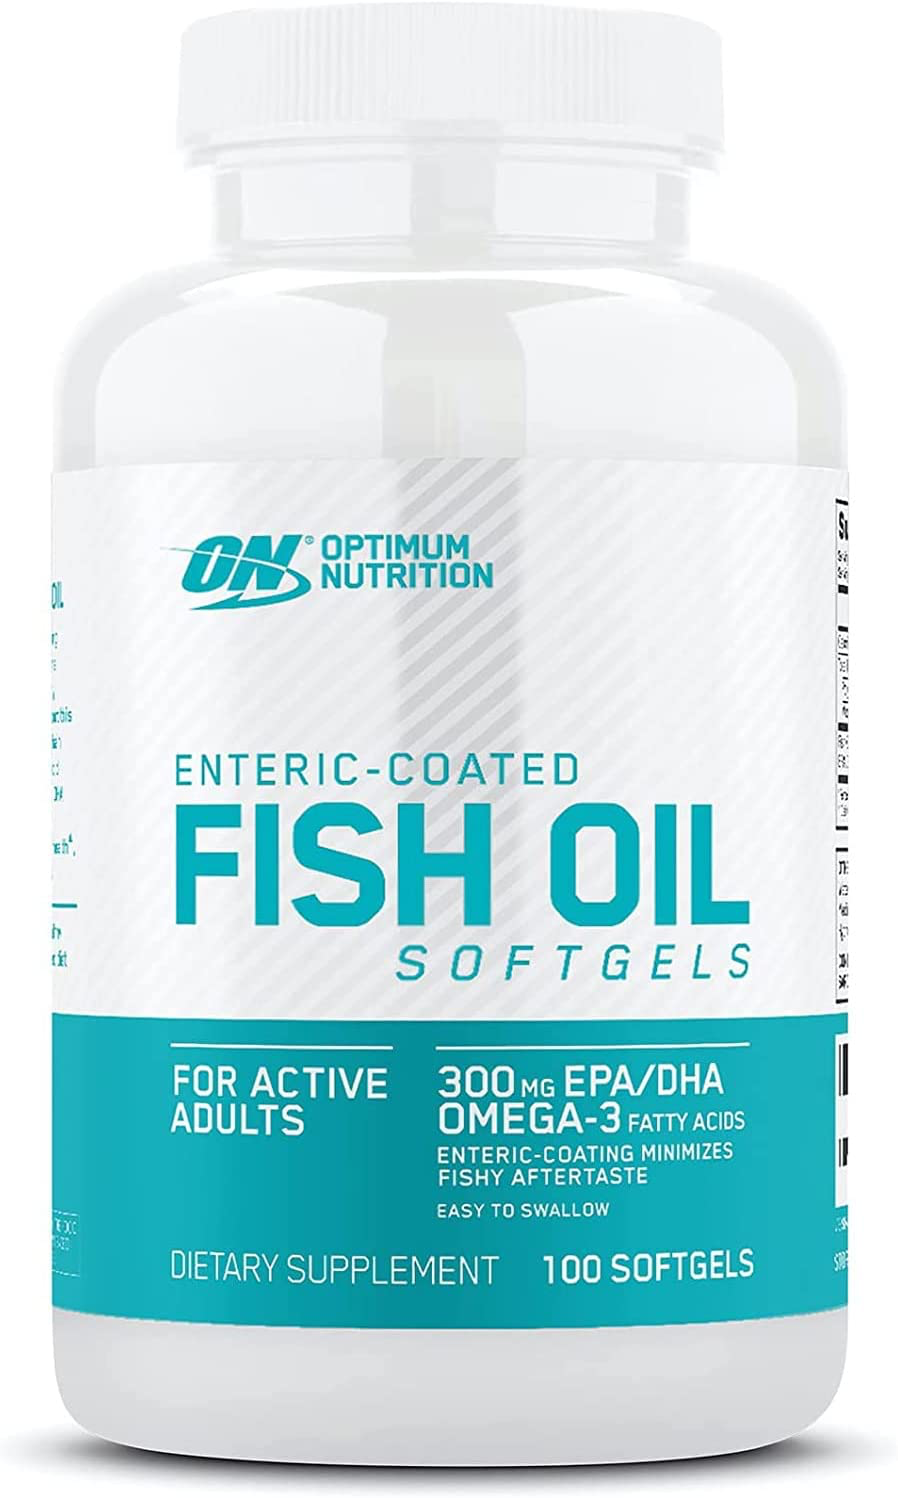 Optimum Nutrition (ON) Omega 3 Fish Oil Softgels for Active Adults - 300 MG, 100 - $83.00